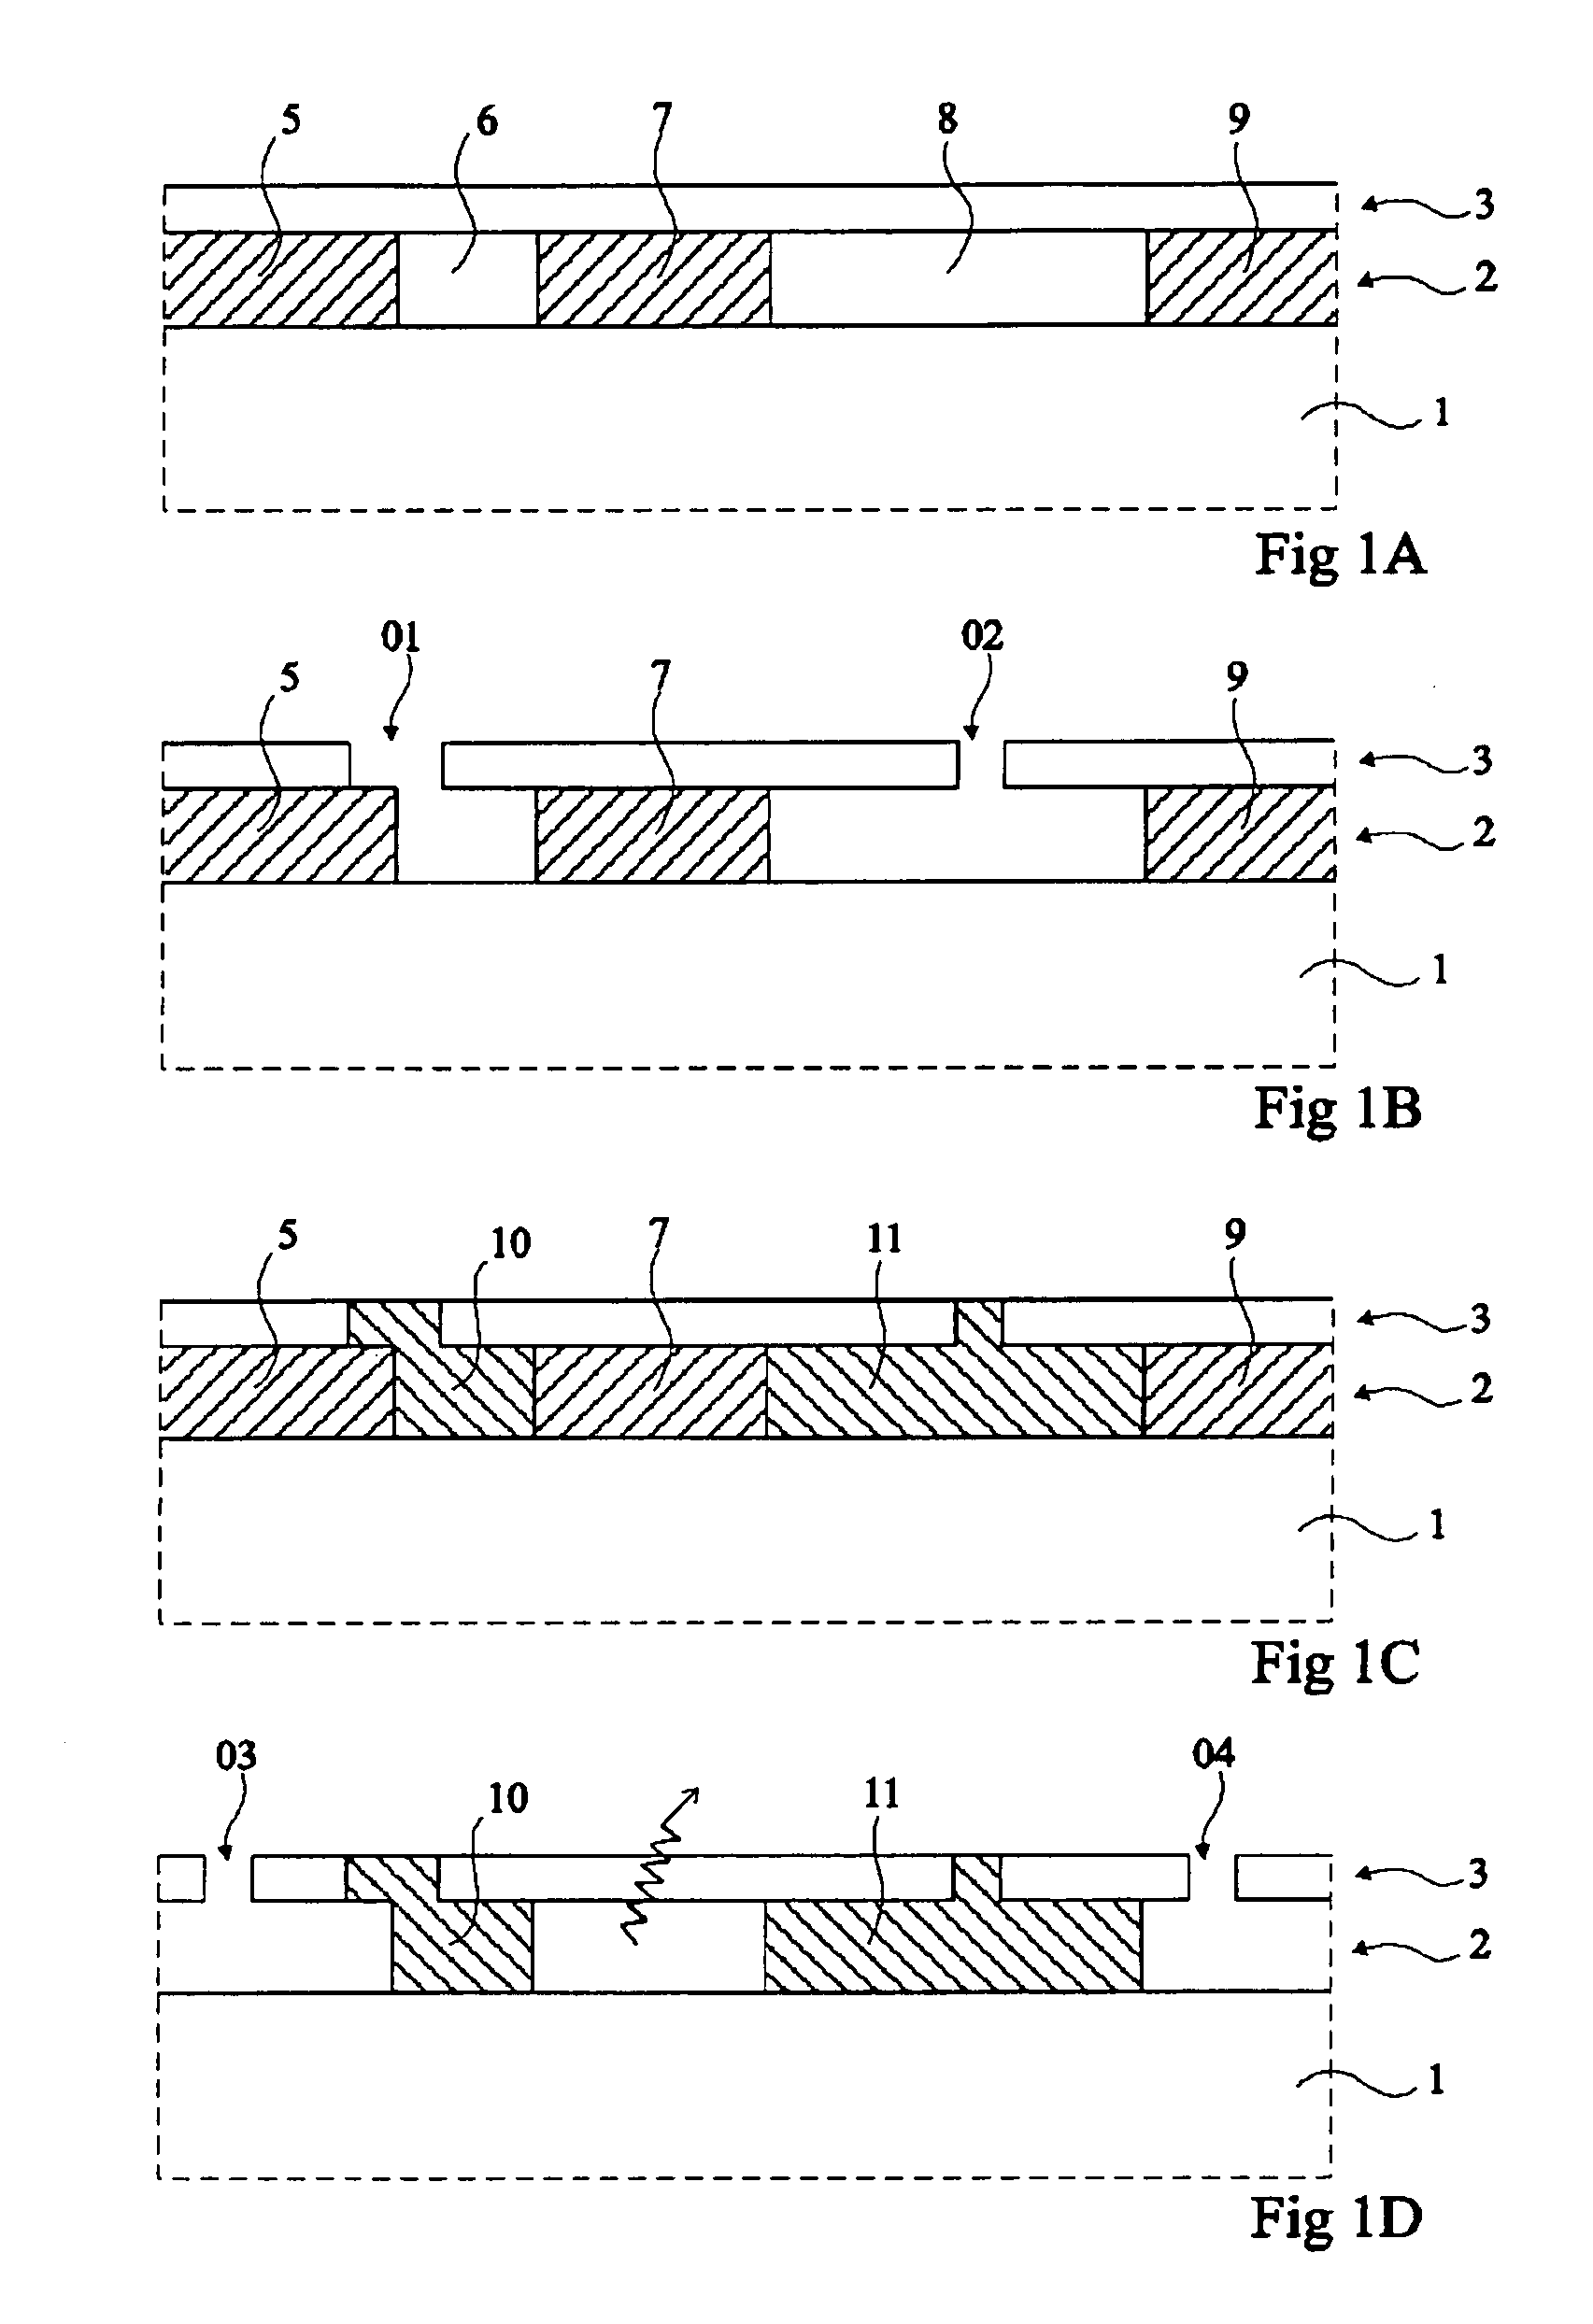 Method for forming, under a thin layer of a first material, portions of another material and/or empty areas